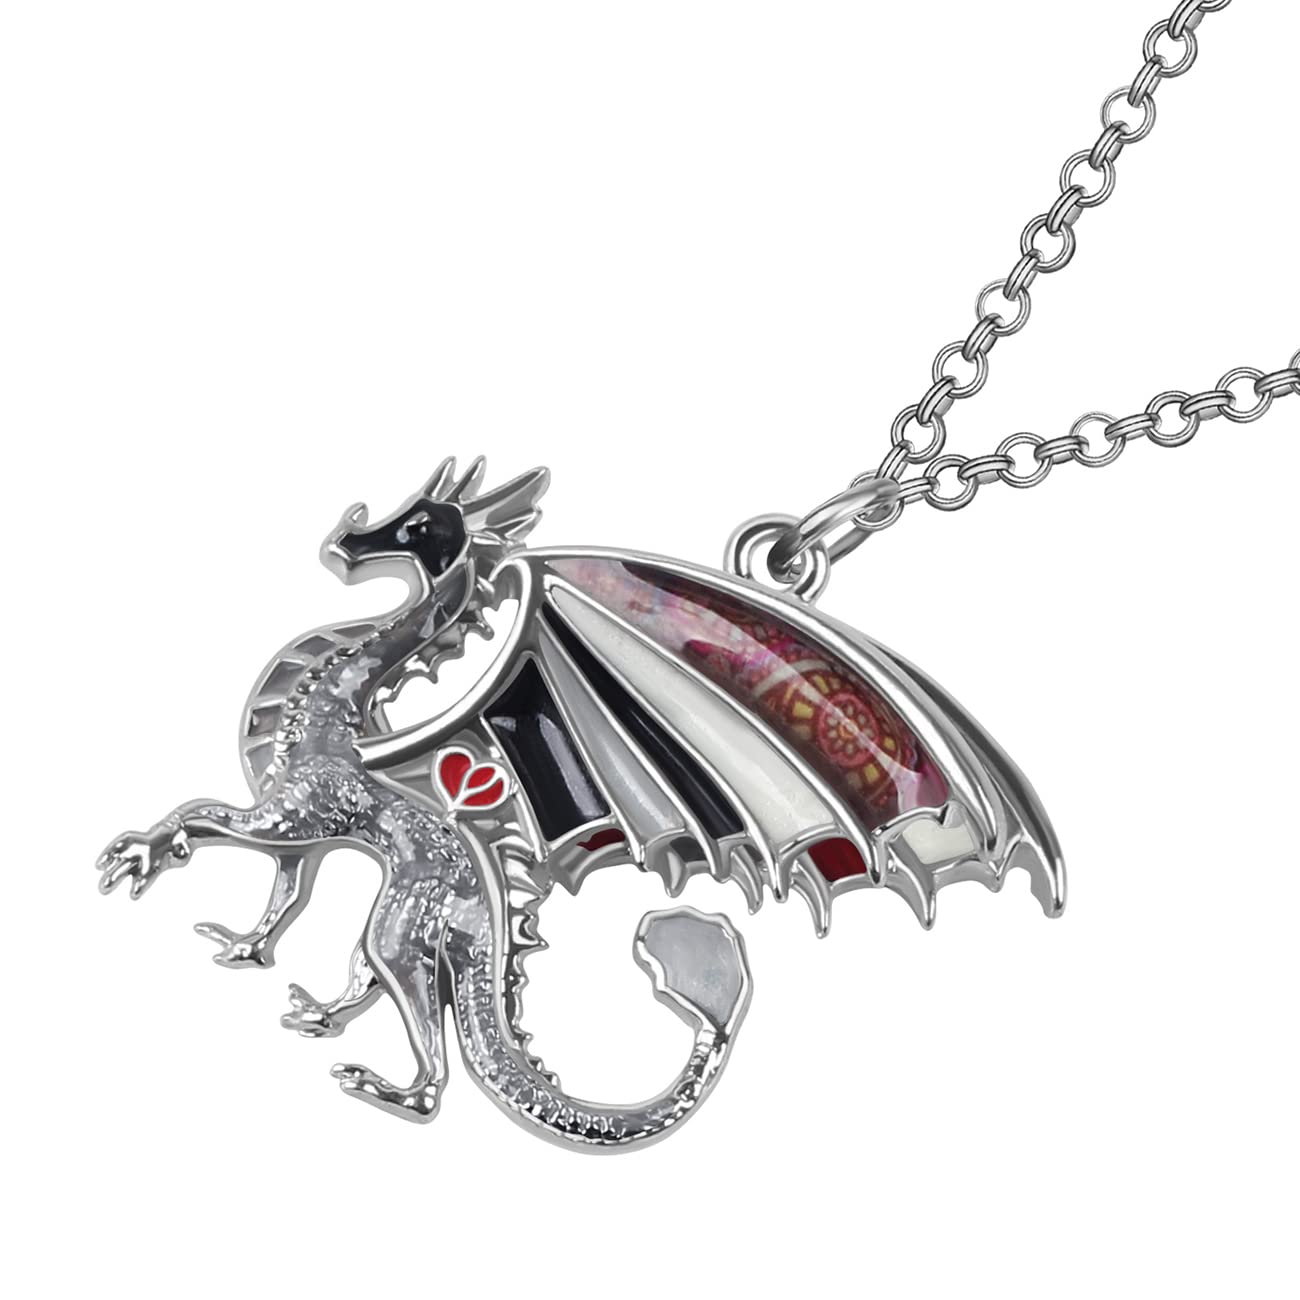 10Pcs Charms for Jewelry Making Winged Dragon Pendants Dragon King